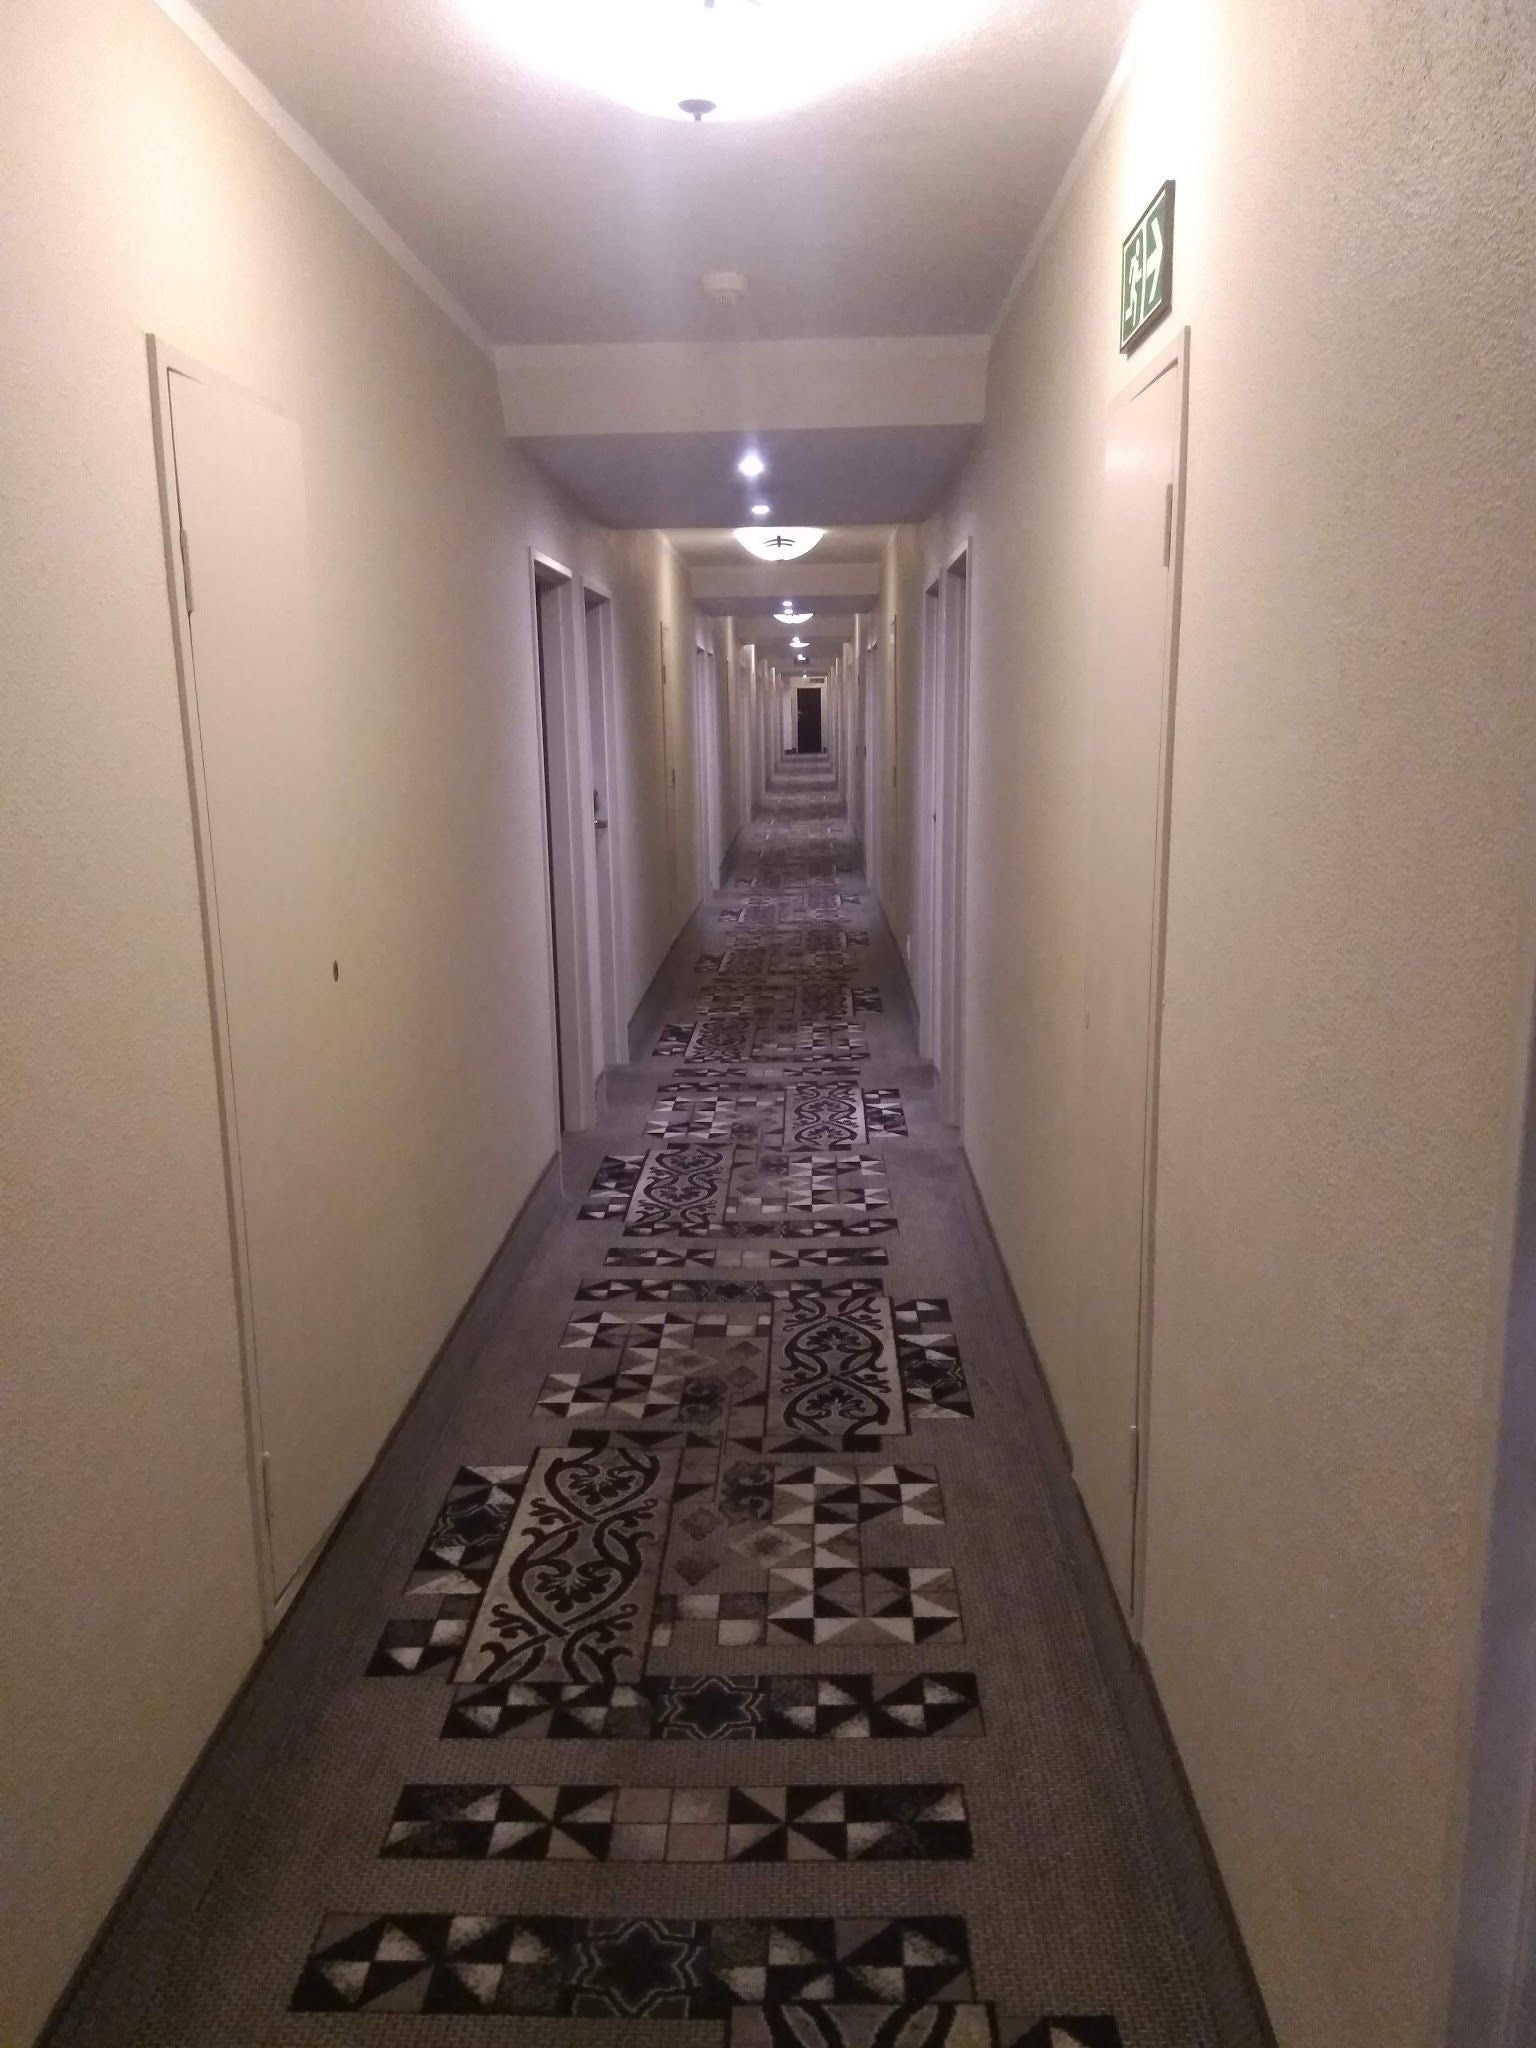 Town Lodge Polokwane Polokwane Pietersburg Limpopo Province South Africa Hallway, Leading Lines